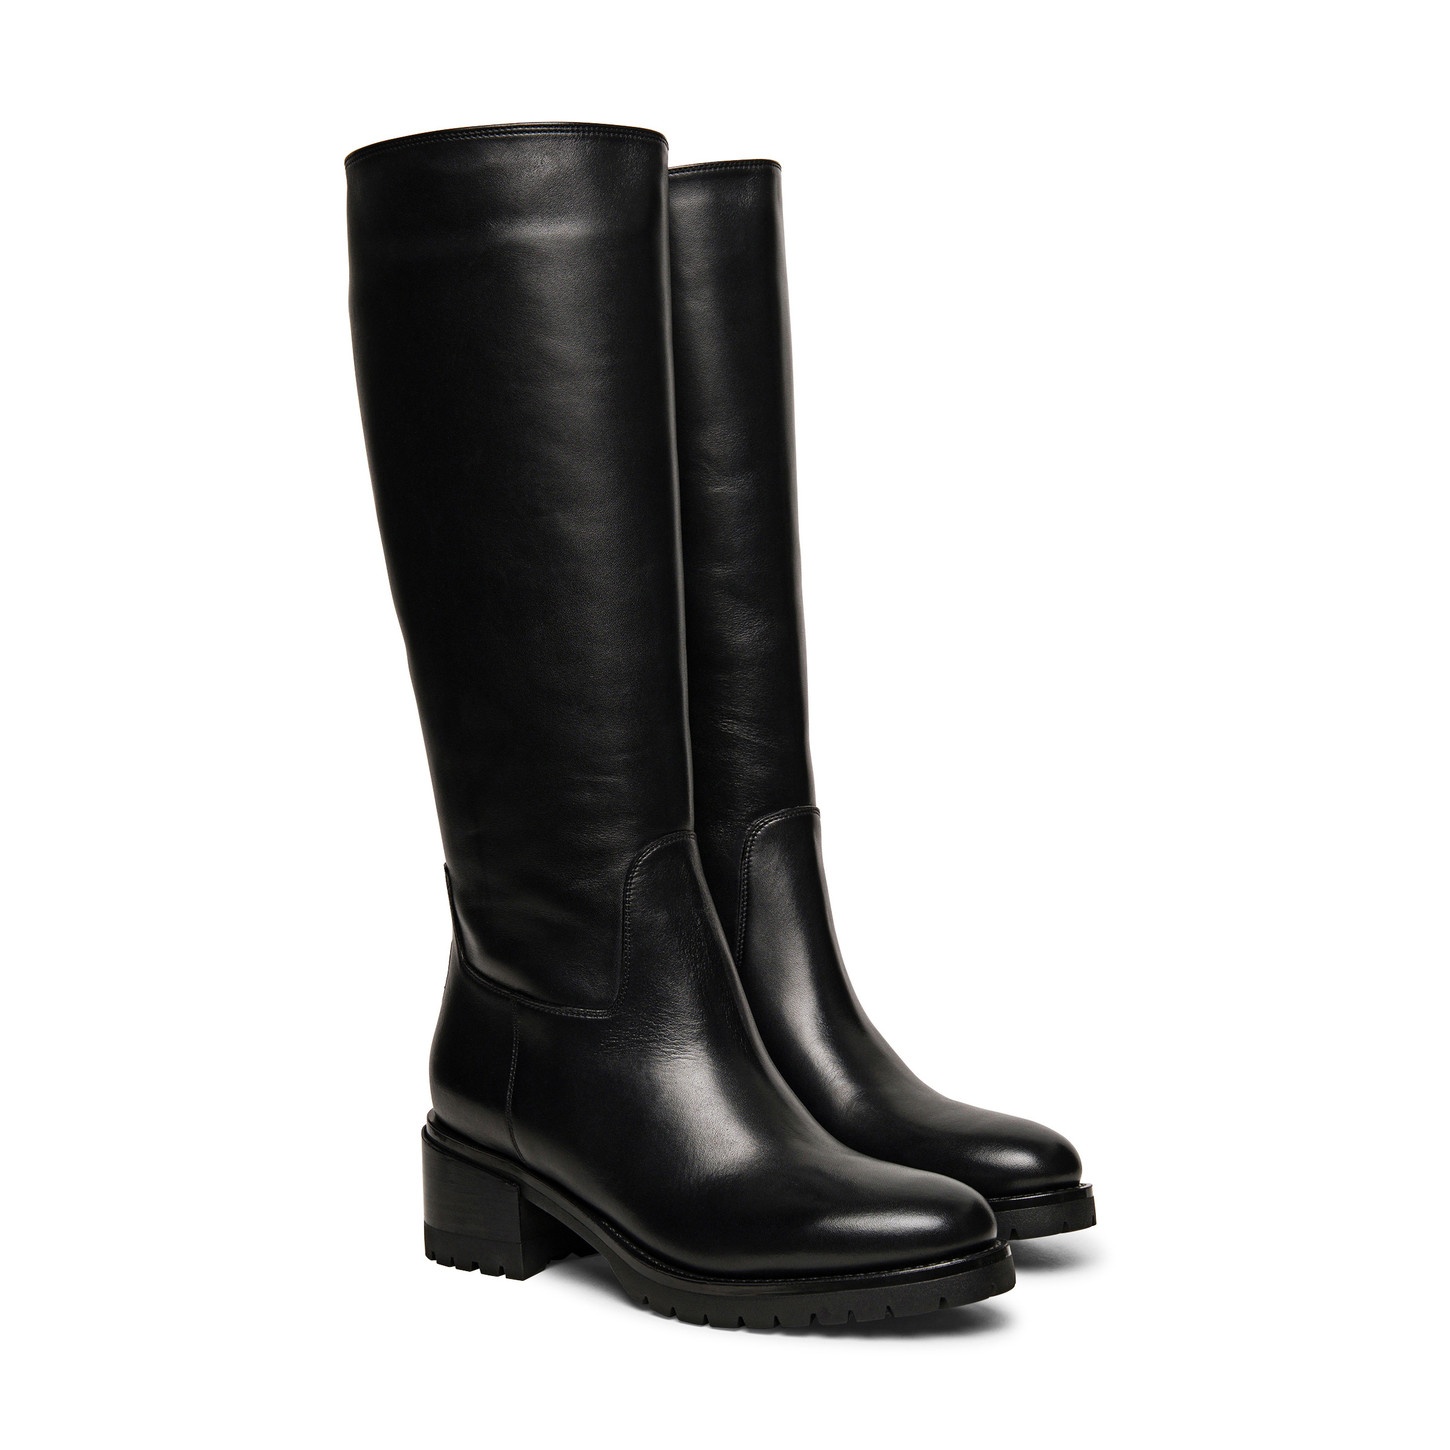 Women’s black leather boot - 2